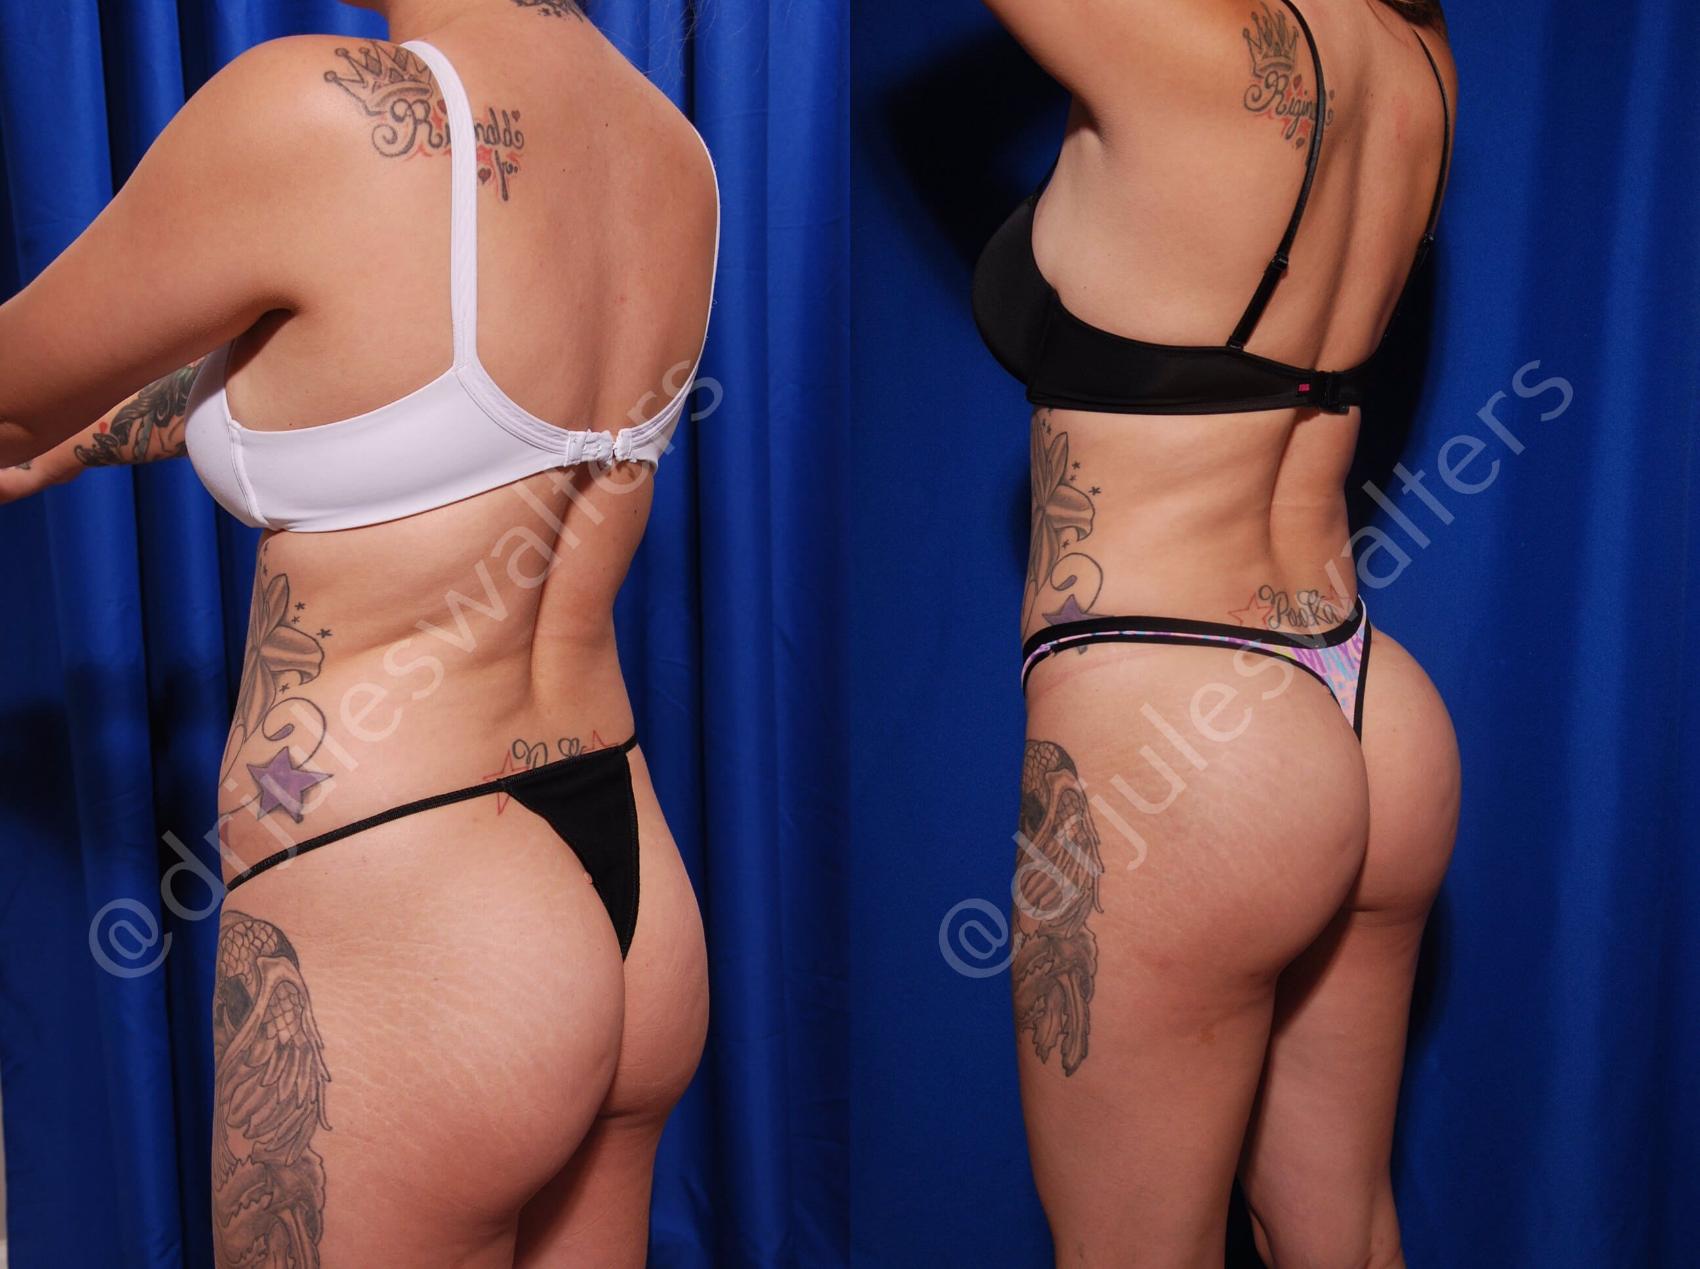 Buttock Augmentation & Buttock Shaping With SAFELipo BBL™ in Louisiana